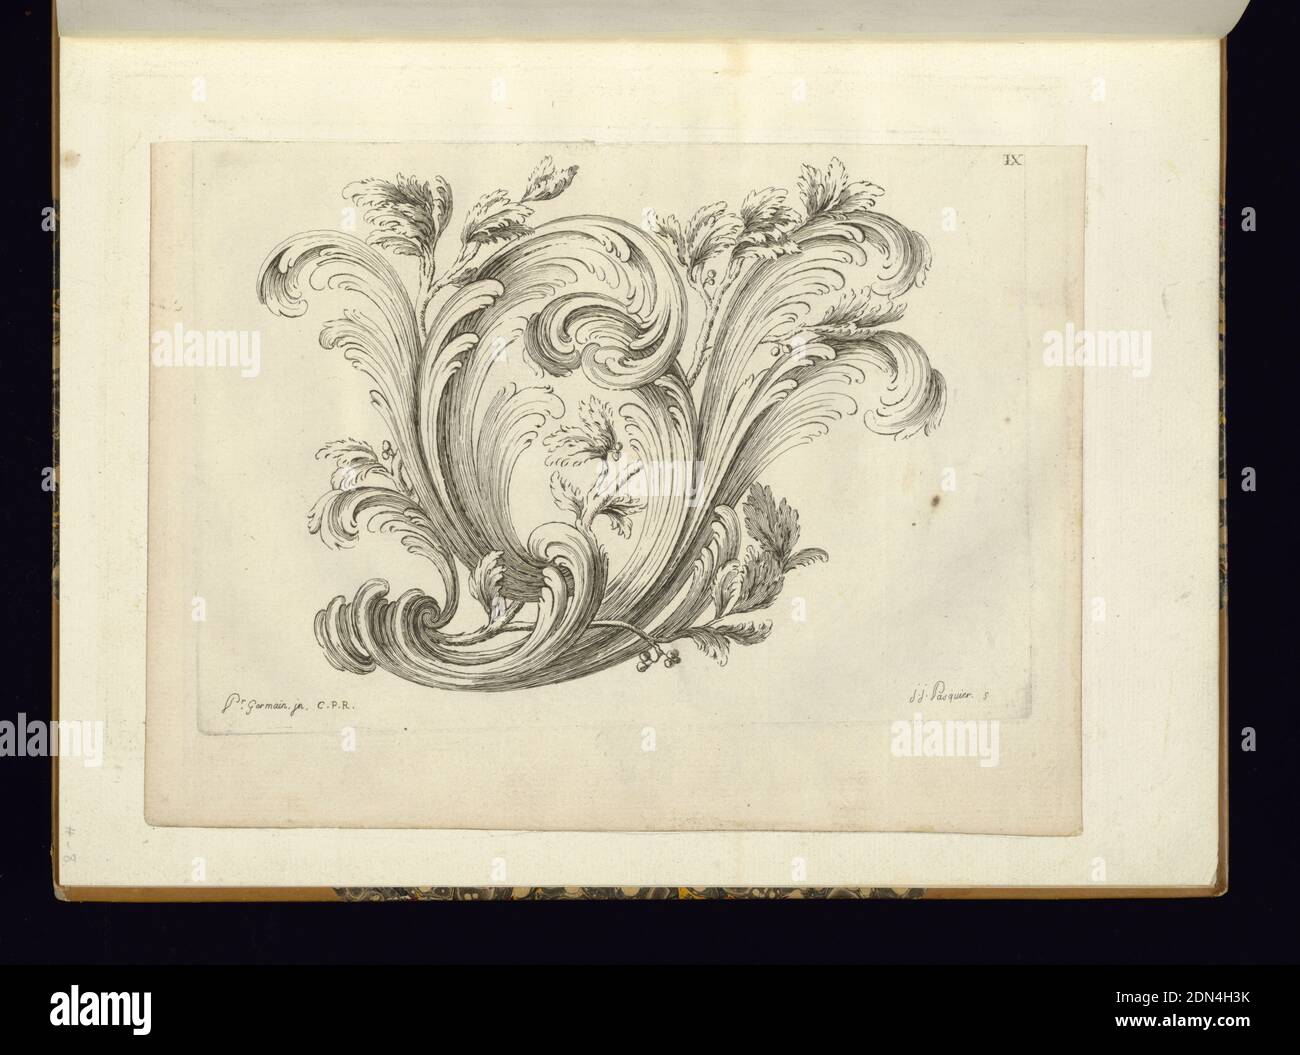 Design for Ornament, Pierre Germain, French, 1703 - 1783, Jacques Jean  Pasquier, French, died 1785, Engraving on paper, Rocaille vegetal ornament  design., France, 1751, ornament, Print Stock Photo - Alamy